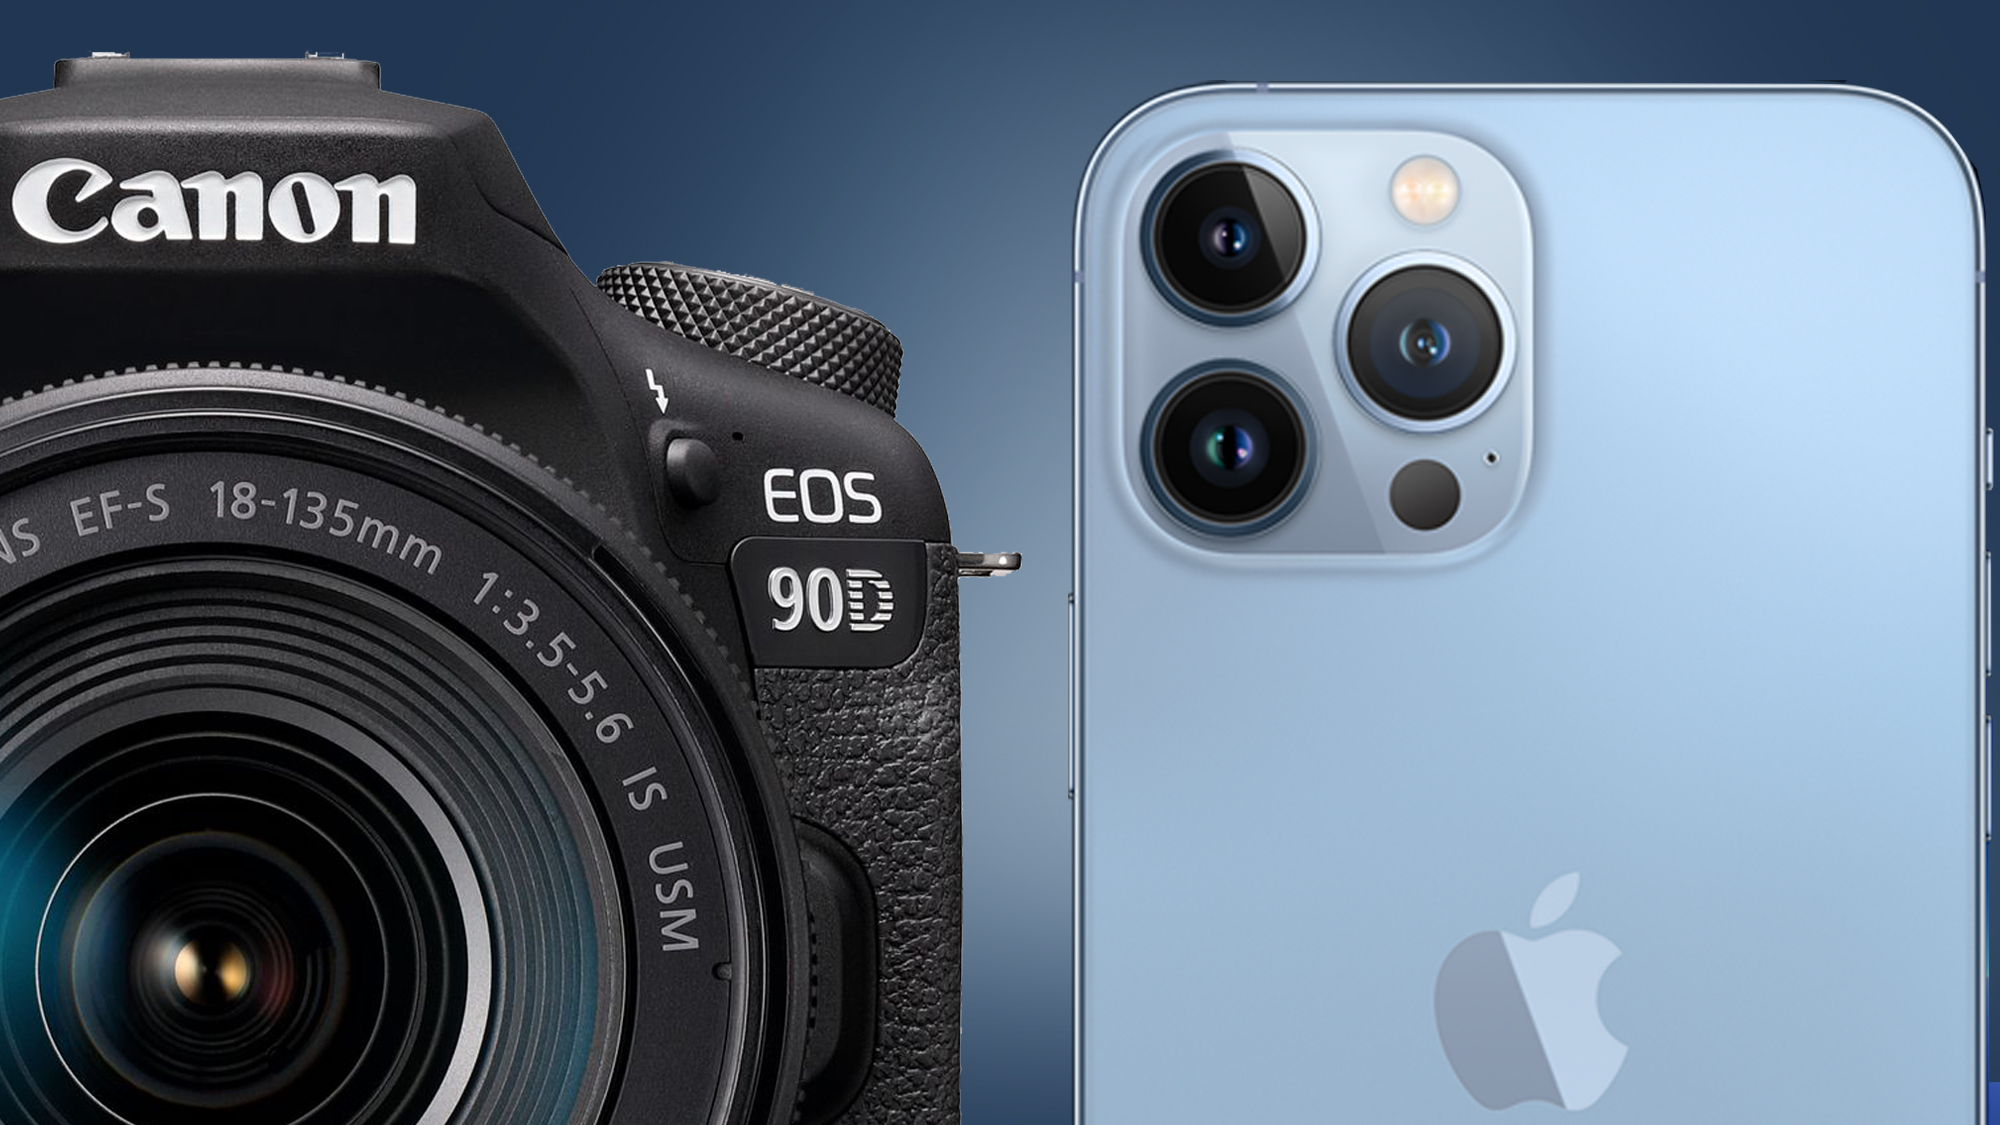 Are iPhones as good as DSLR?